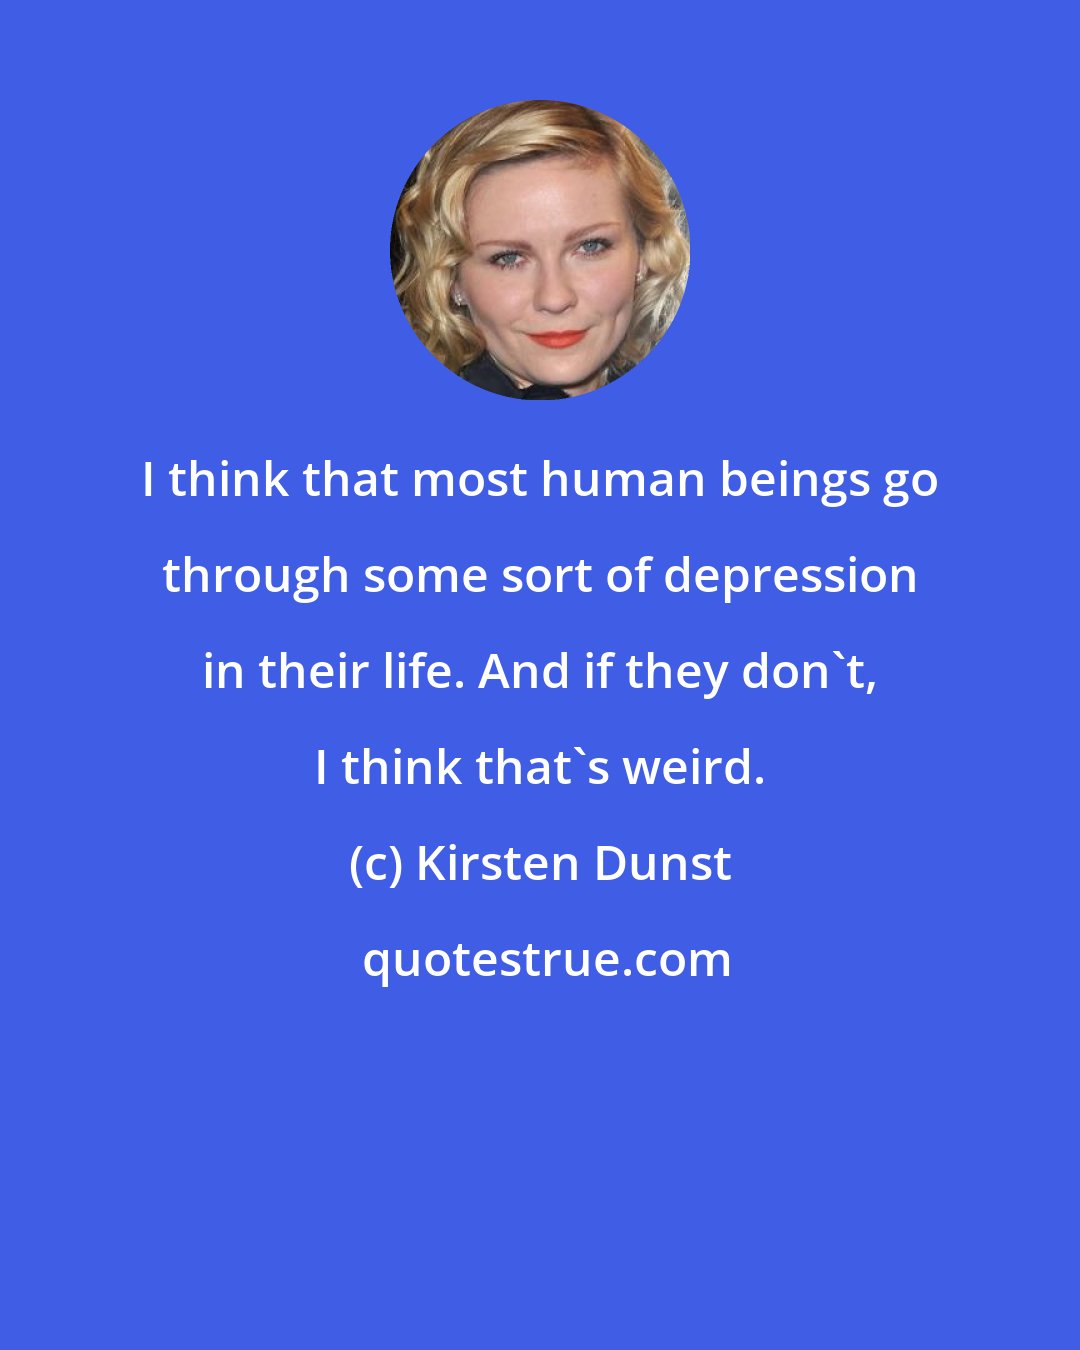 Kirsten Dunst: I think that most human beings go through some sort of depression in their life. And if they don't, I think that's weird.